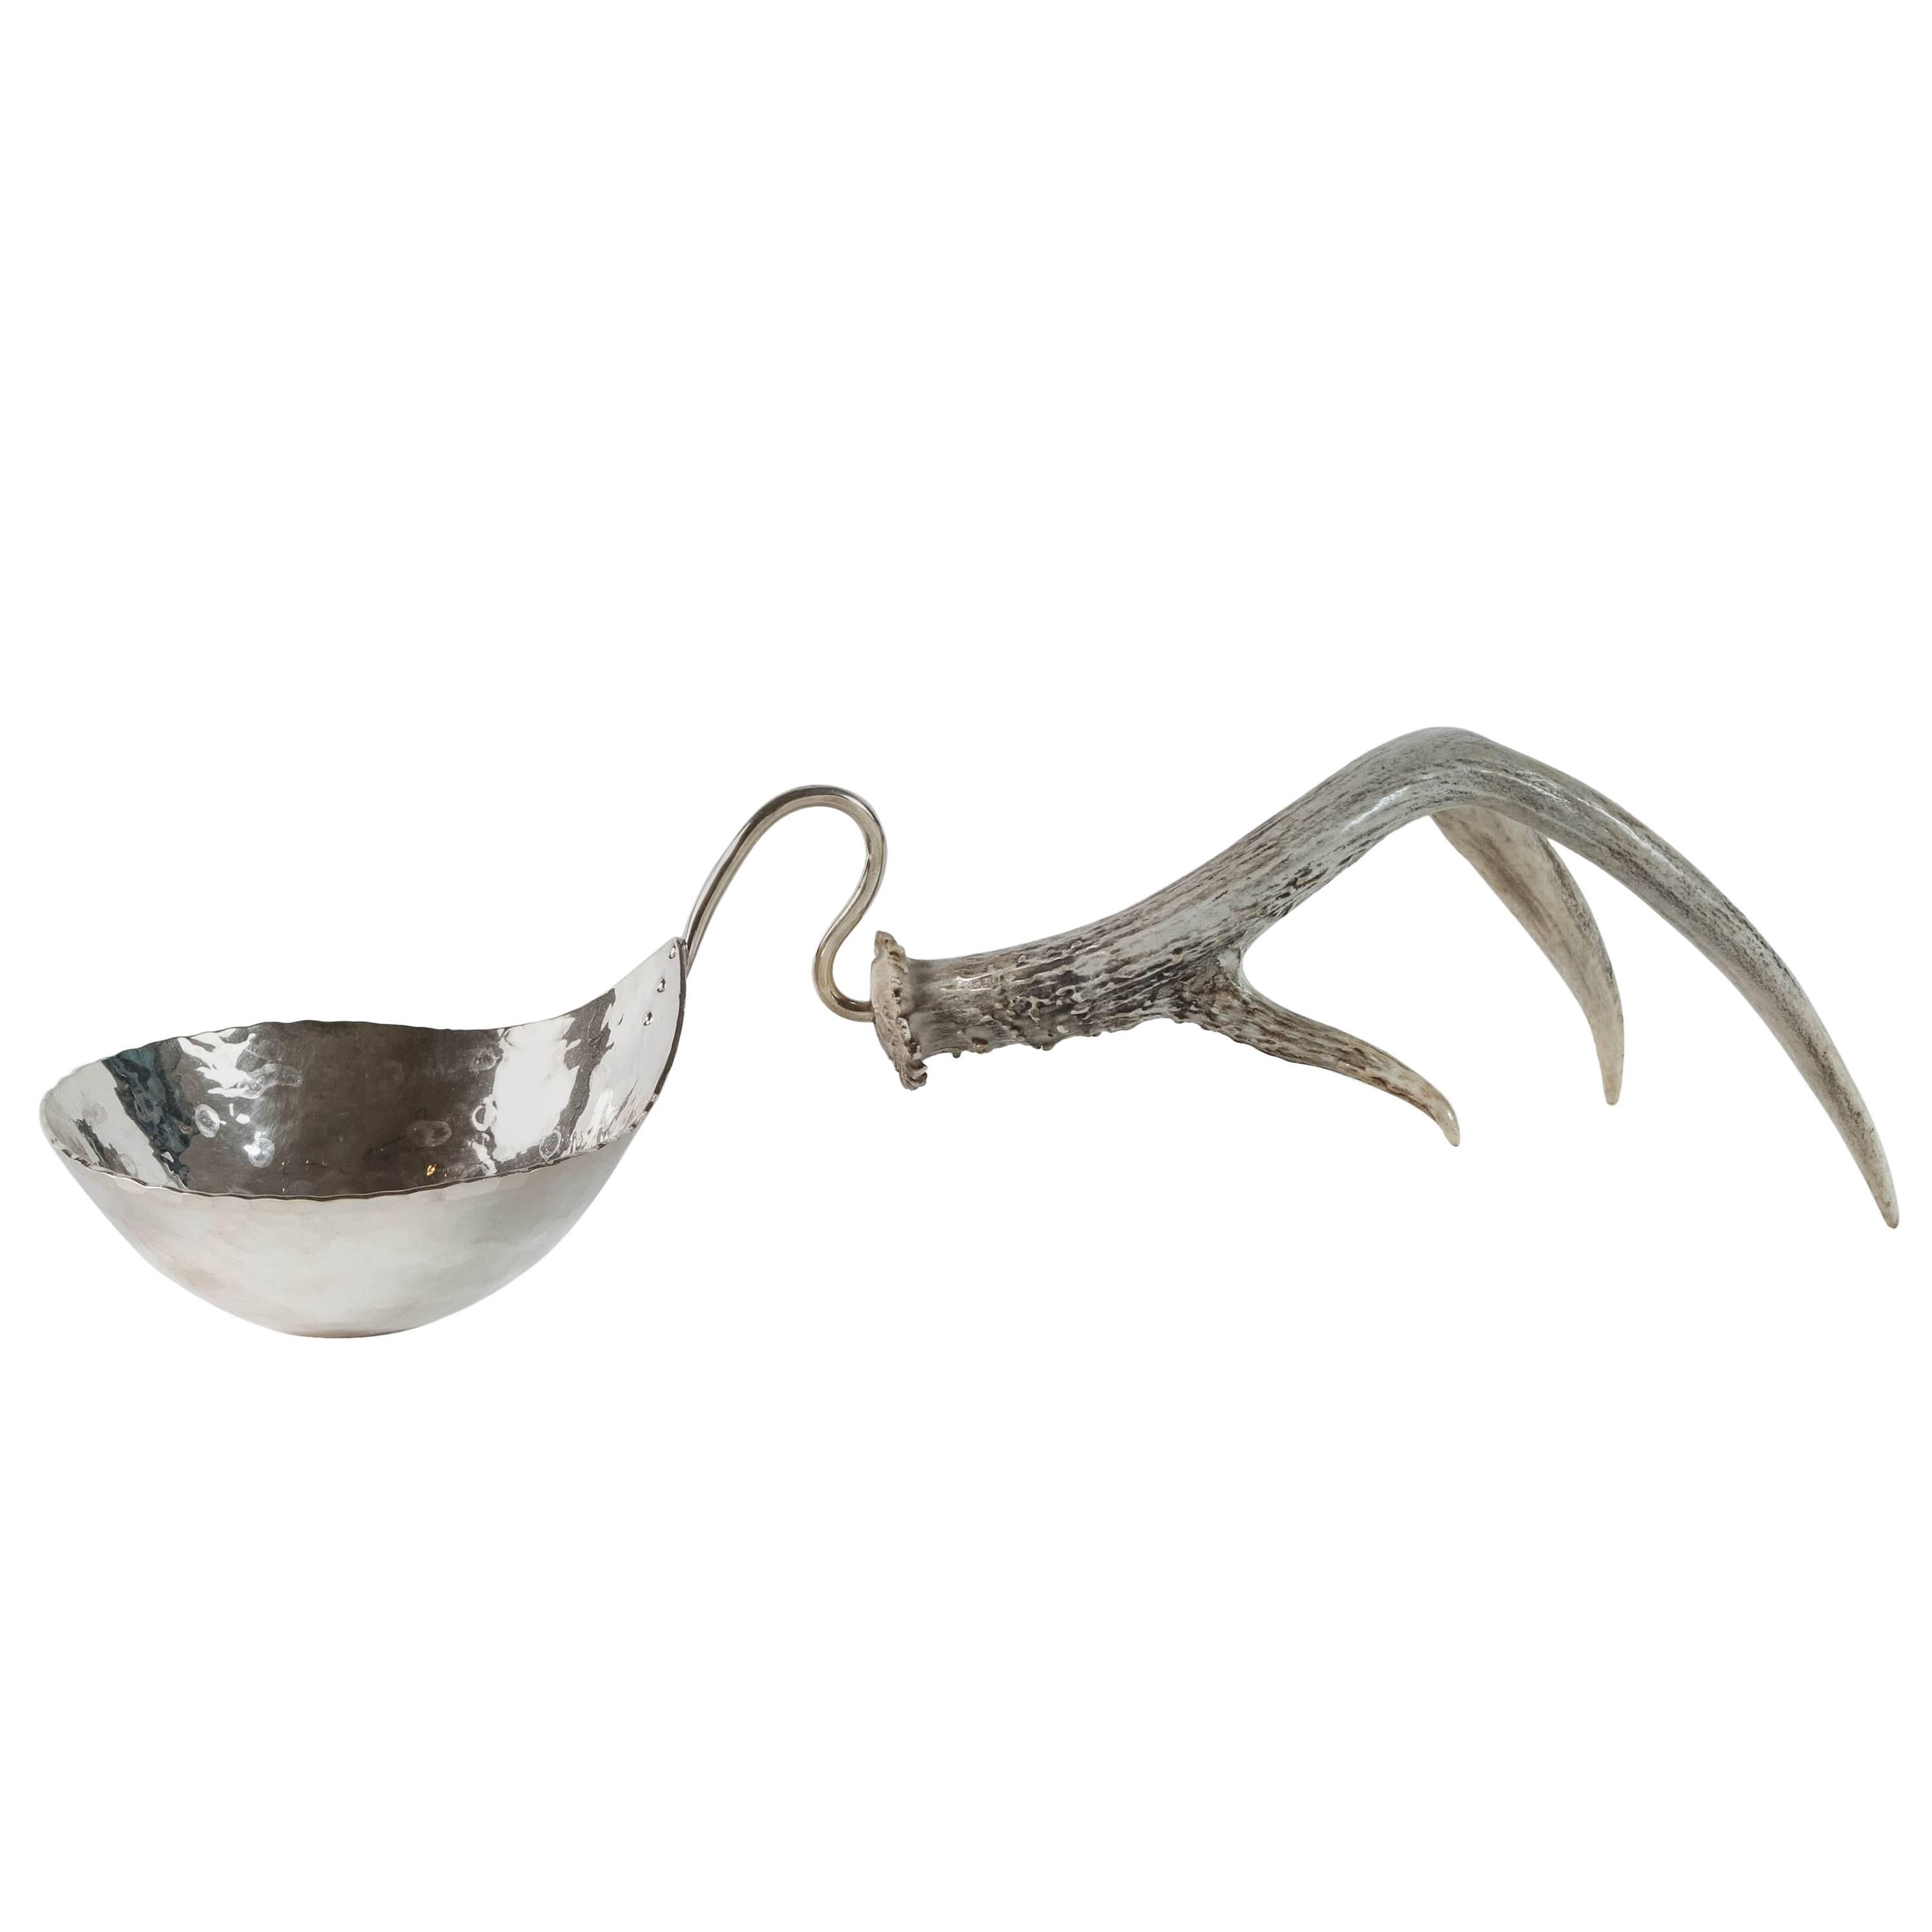 Hammered Silver Nut Bowl with Antler Handle by Ben Caldwell For Sale